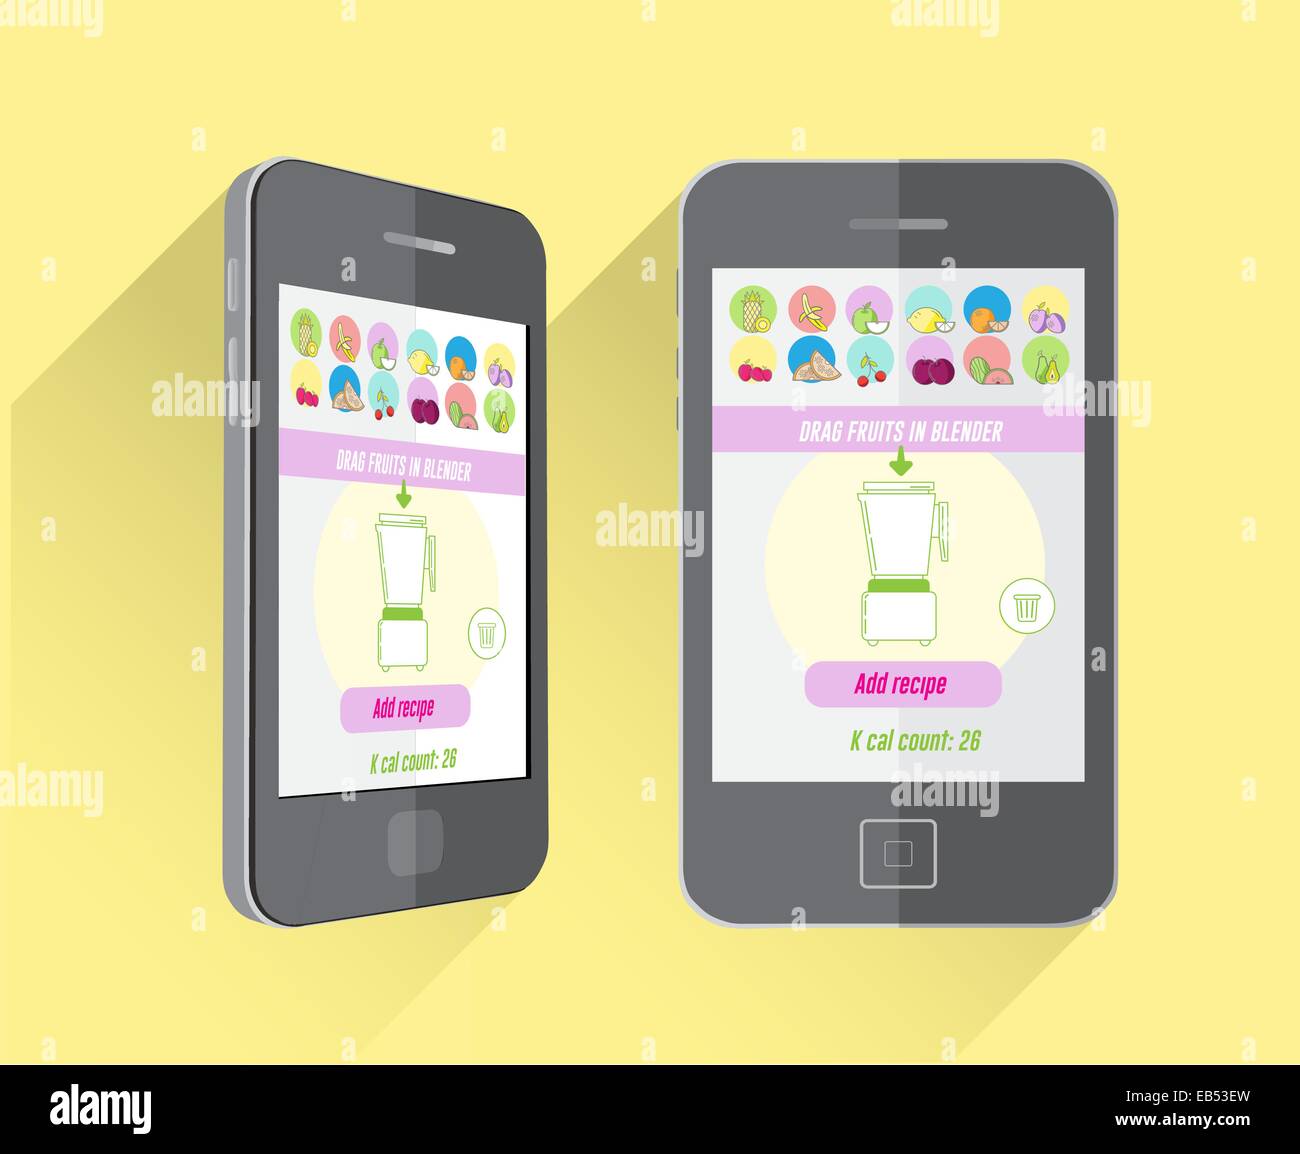 Dieting and fitness app on smartphone screen Stock Vector